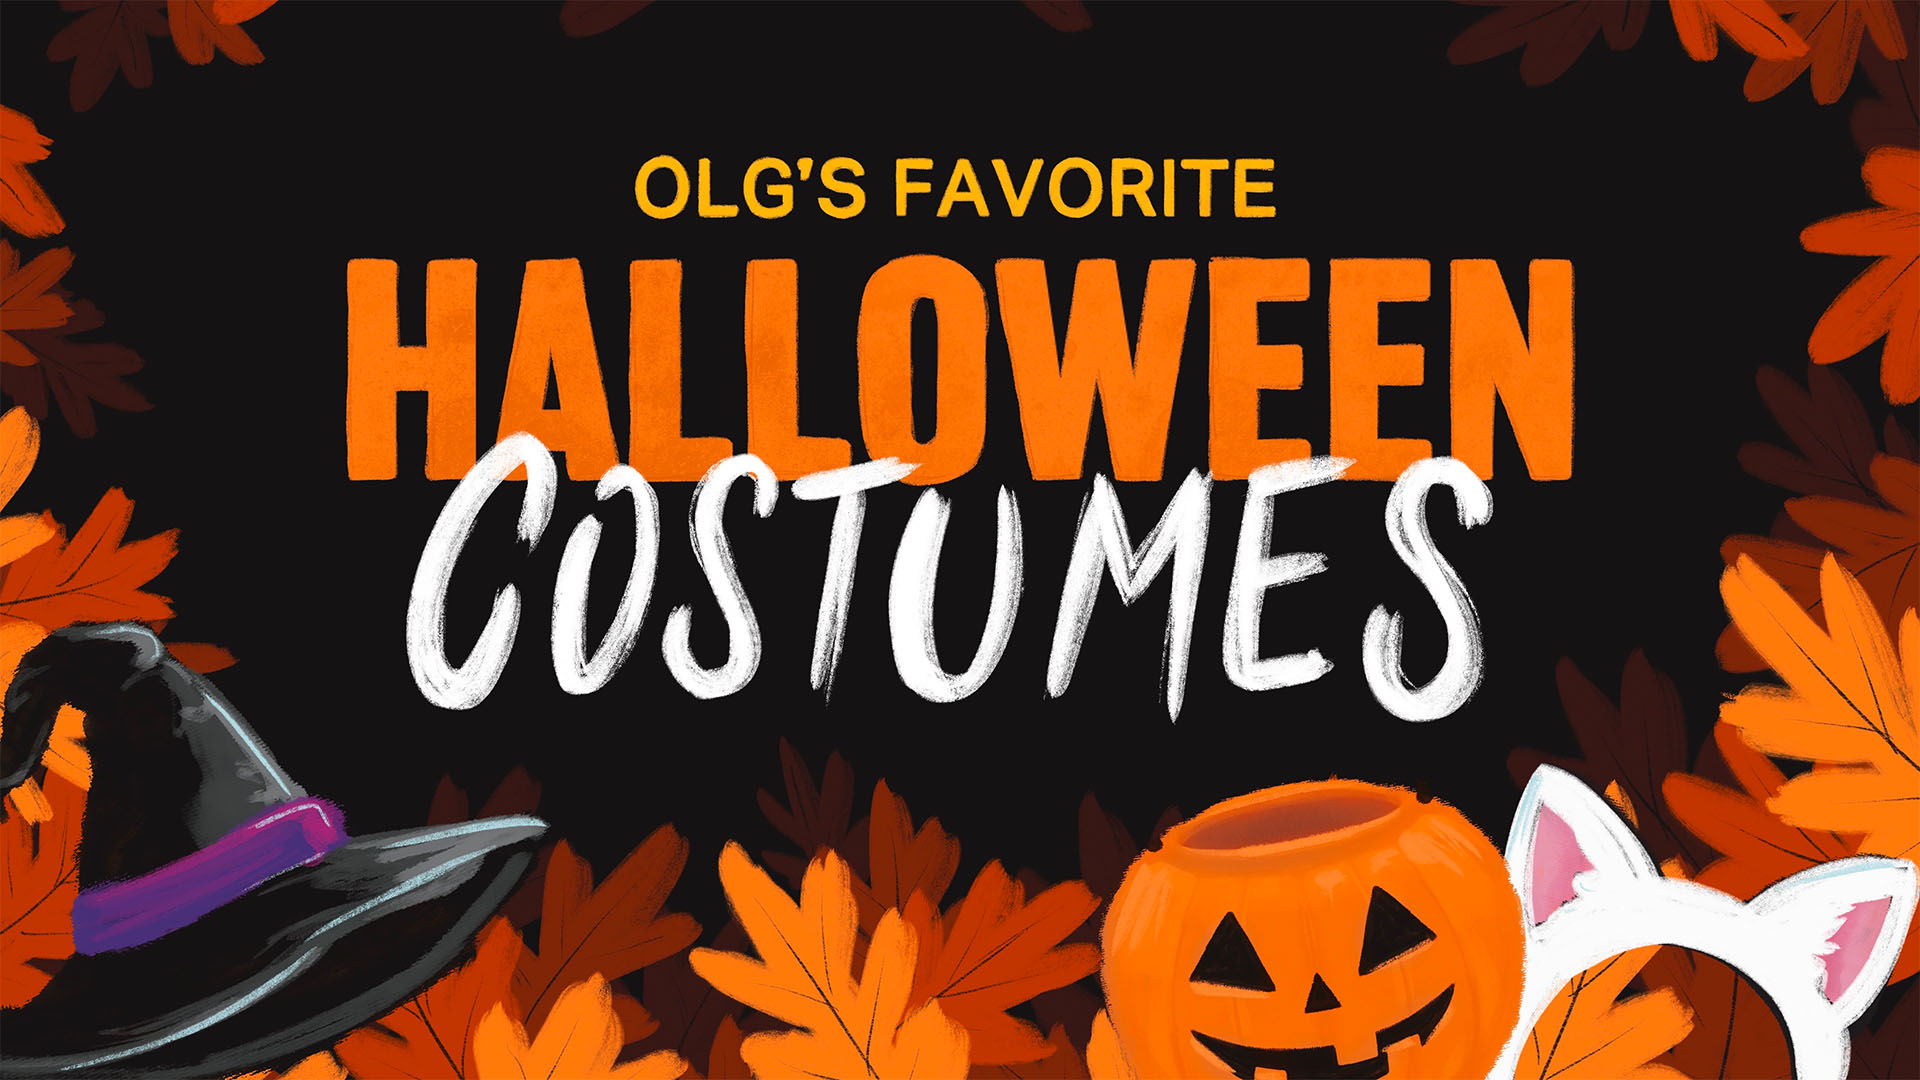 OLG's Favorite Halloween Costumes - One Lucky Guitar